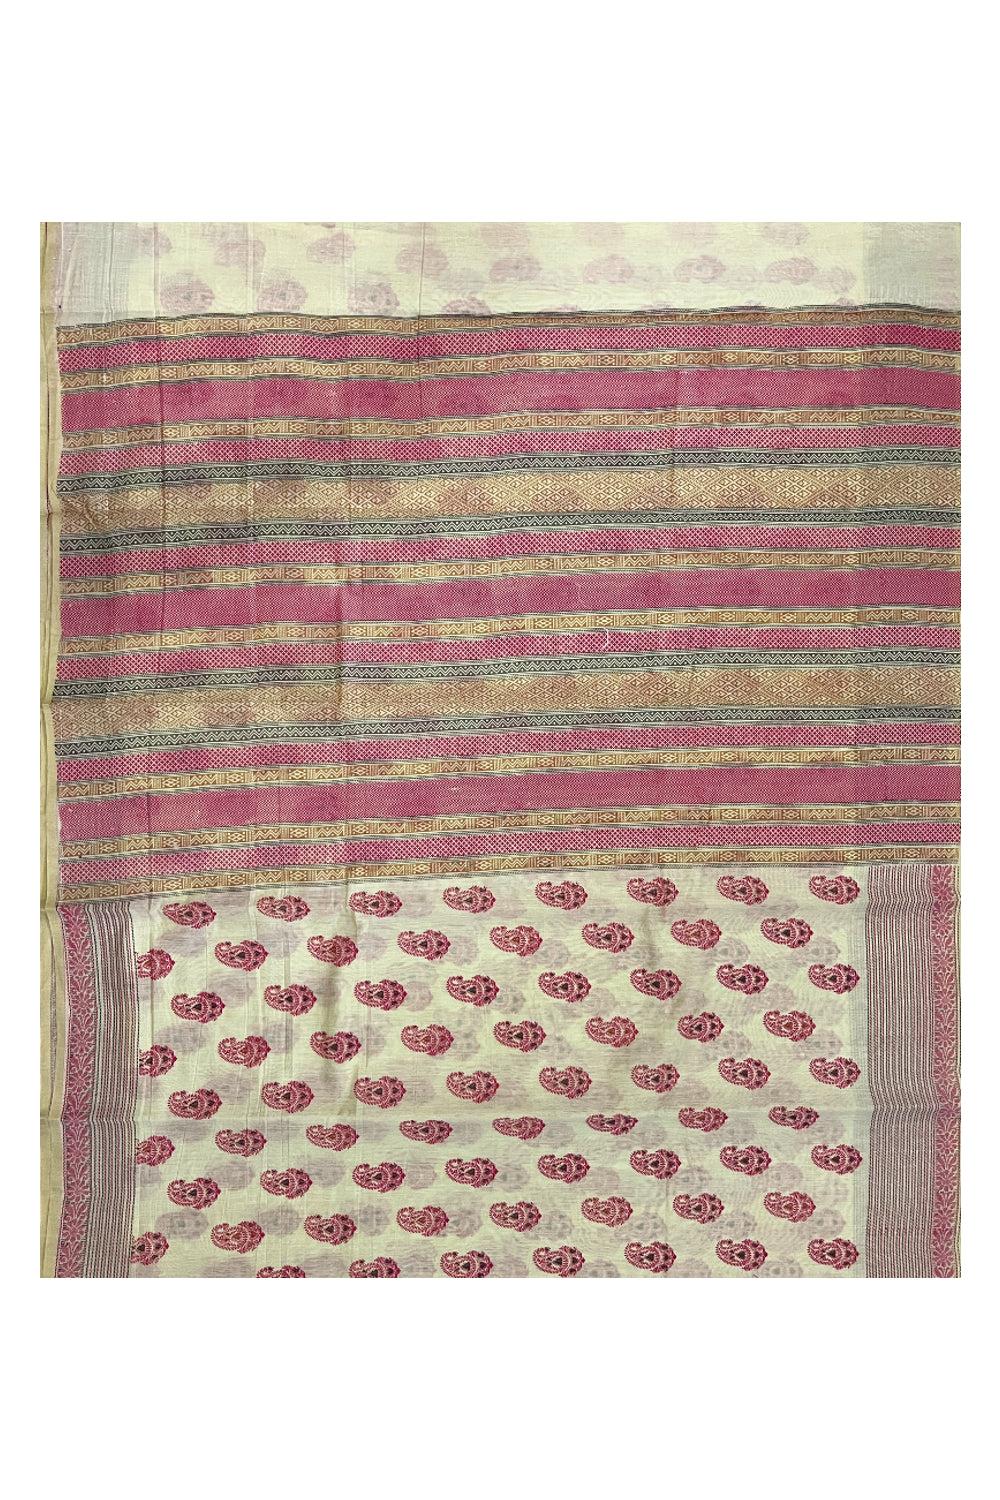 Southloom Cotton Light Brown Saree with Magenta Paisley Prints